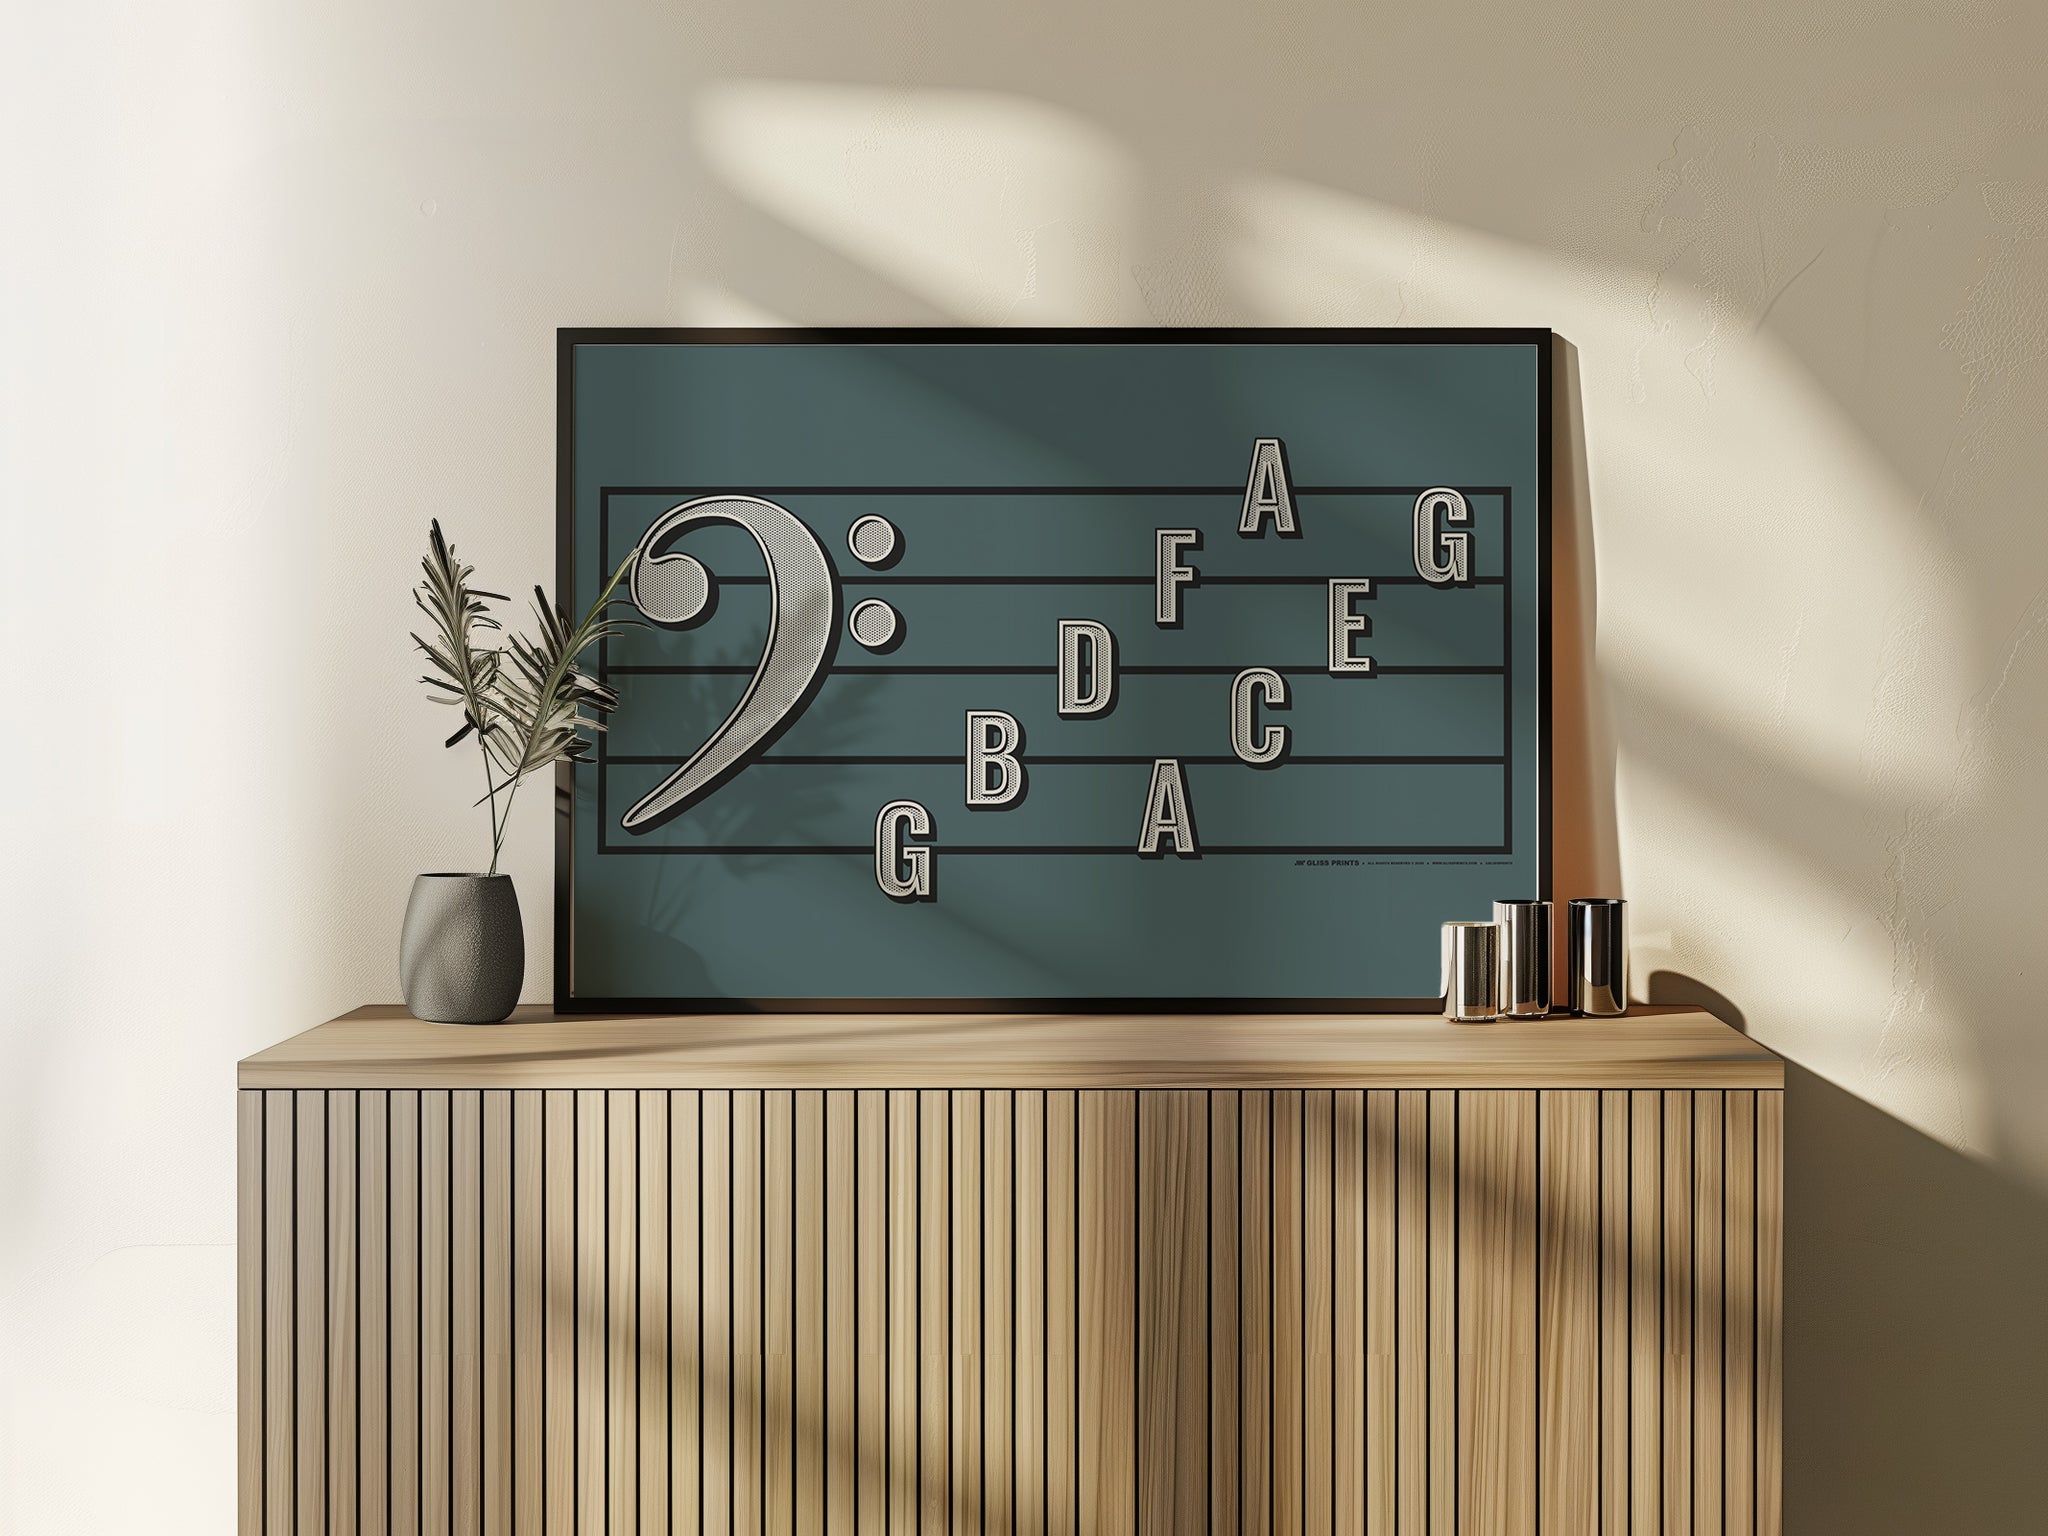 Bass Clef Note Names Poster, Blue